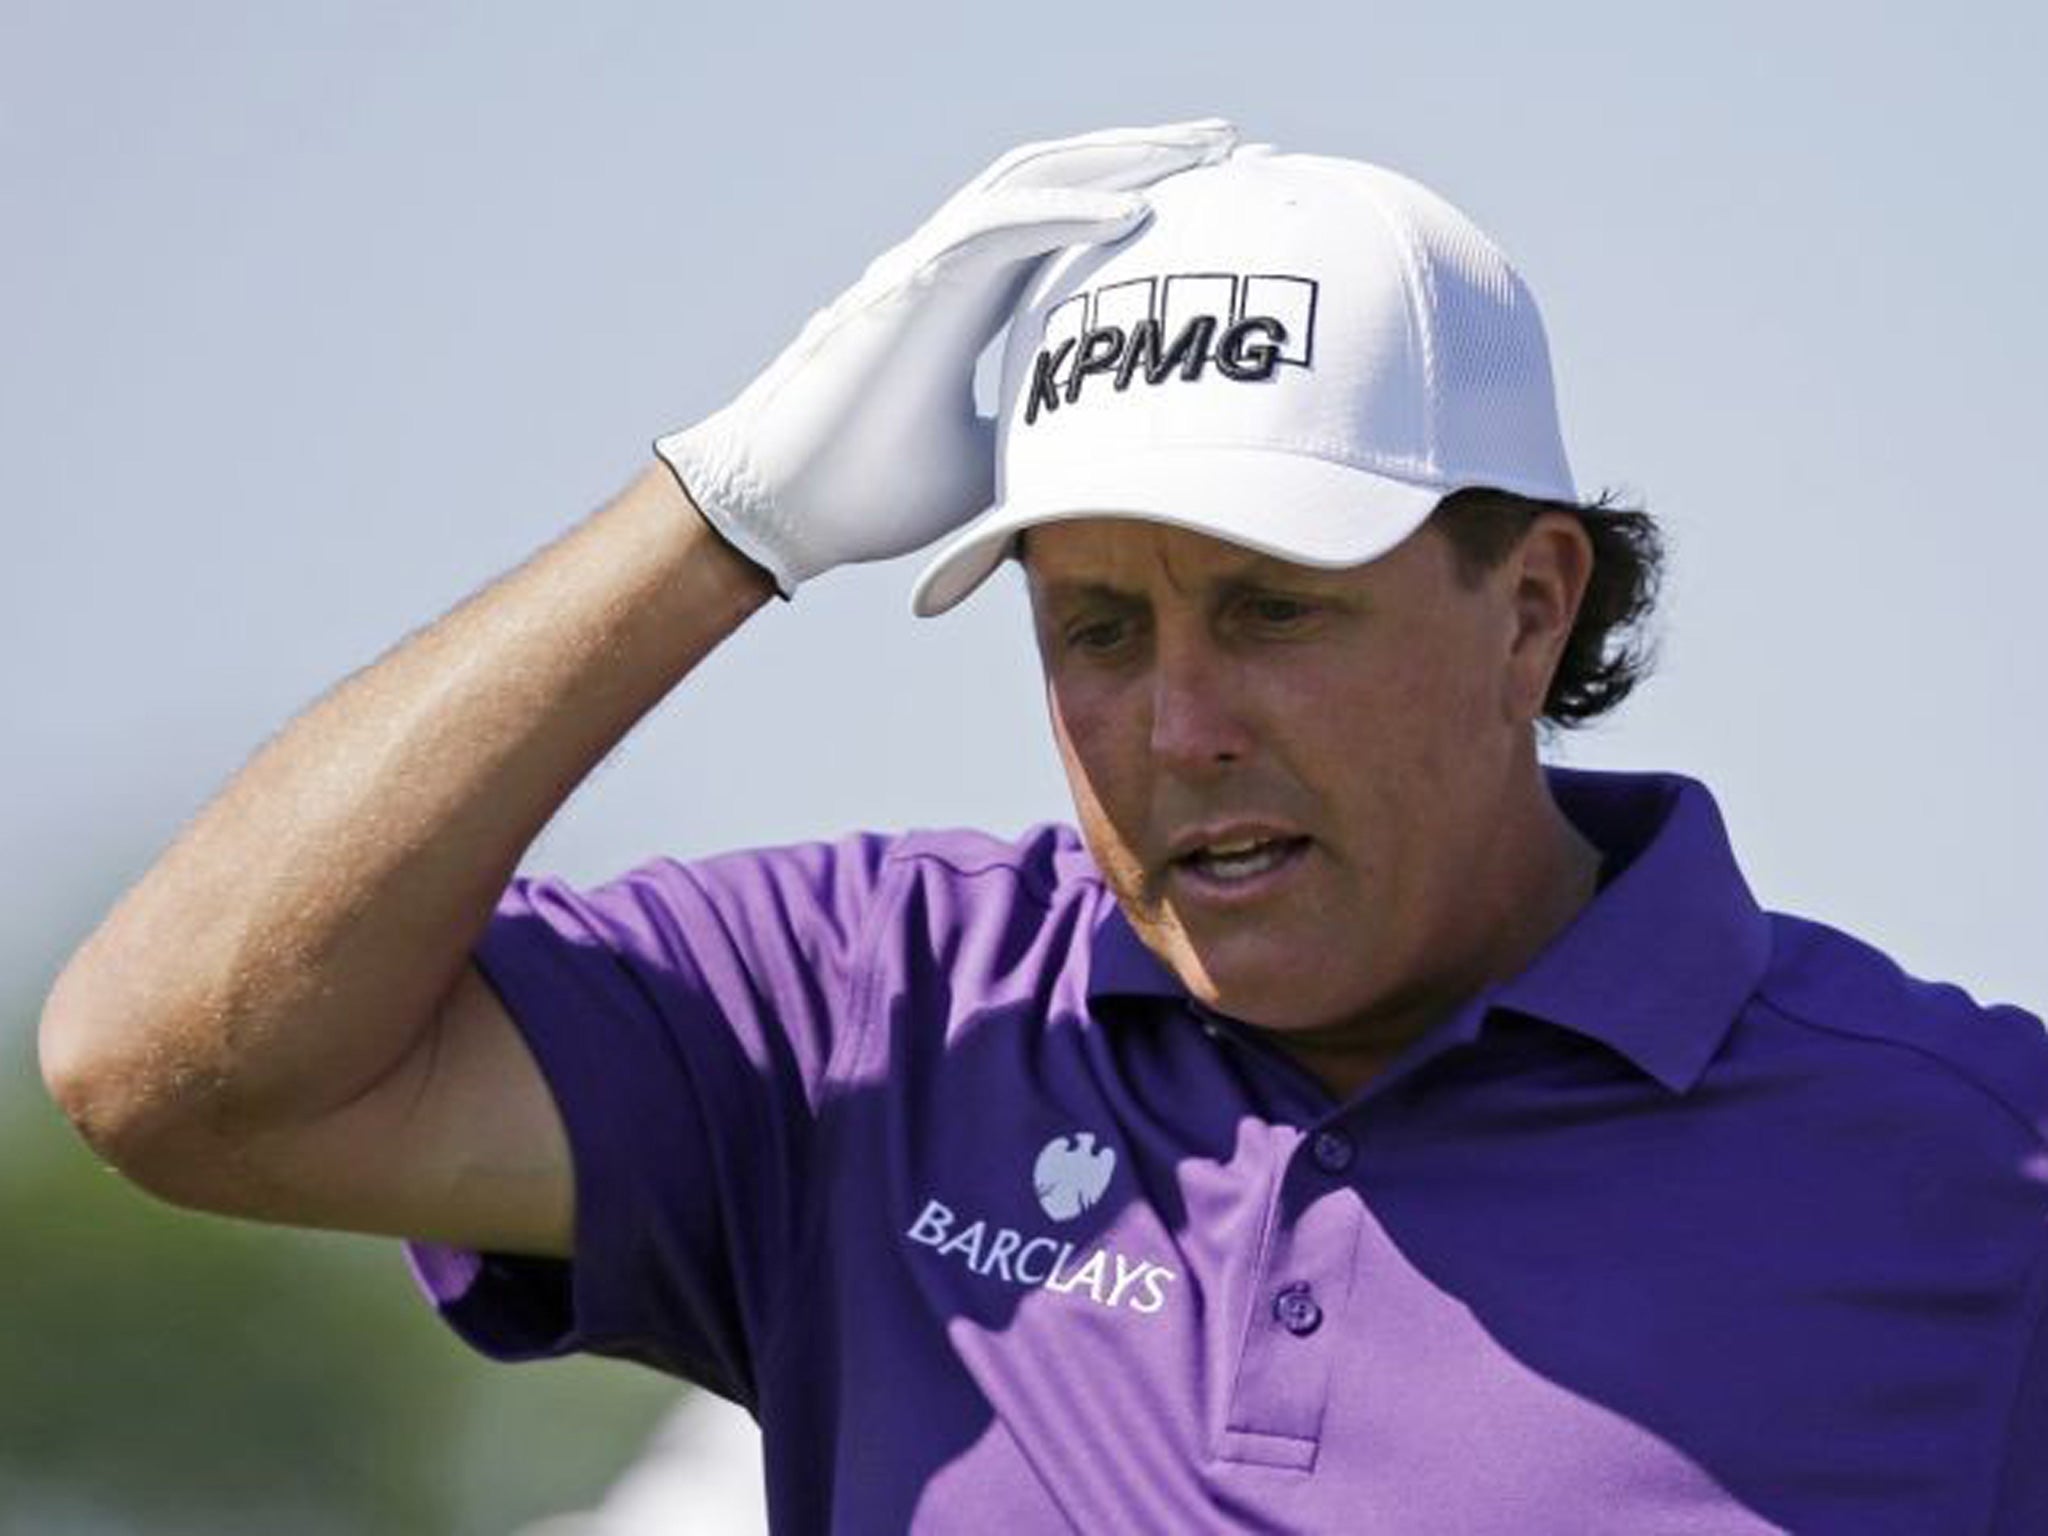 Phil Mickelson may also be involved